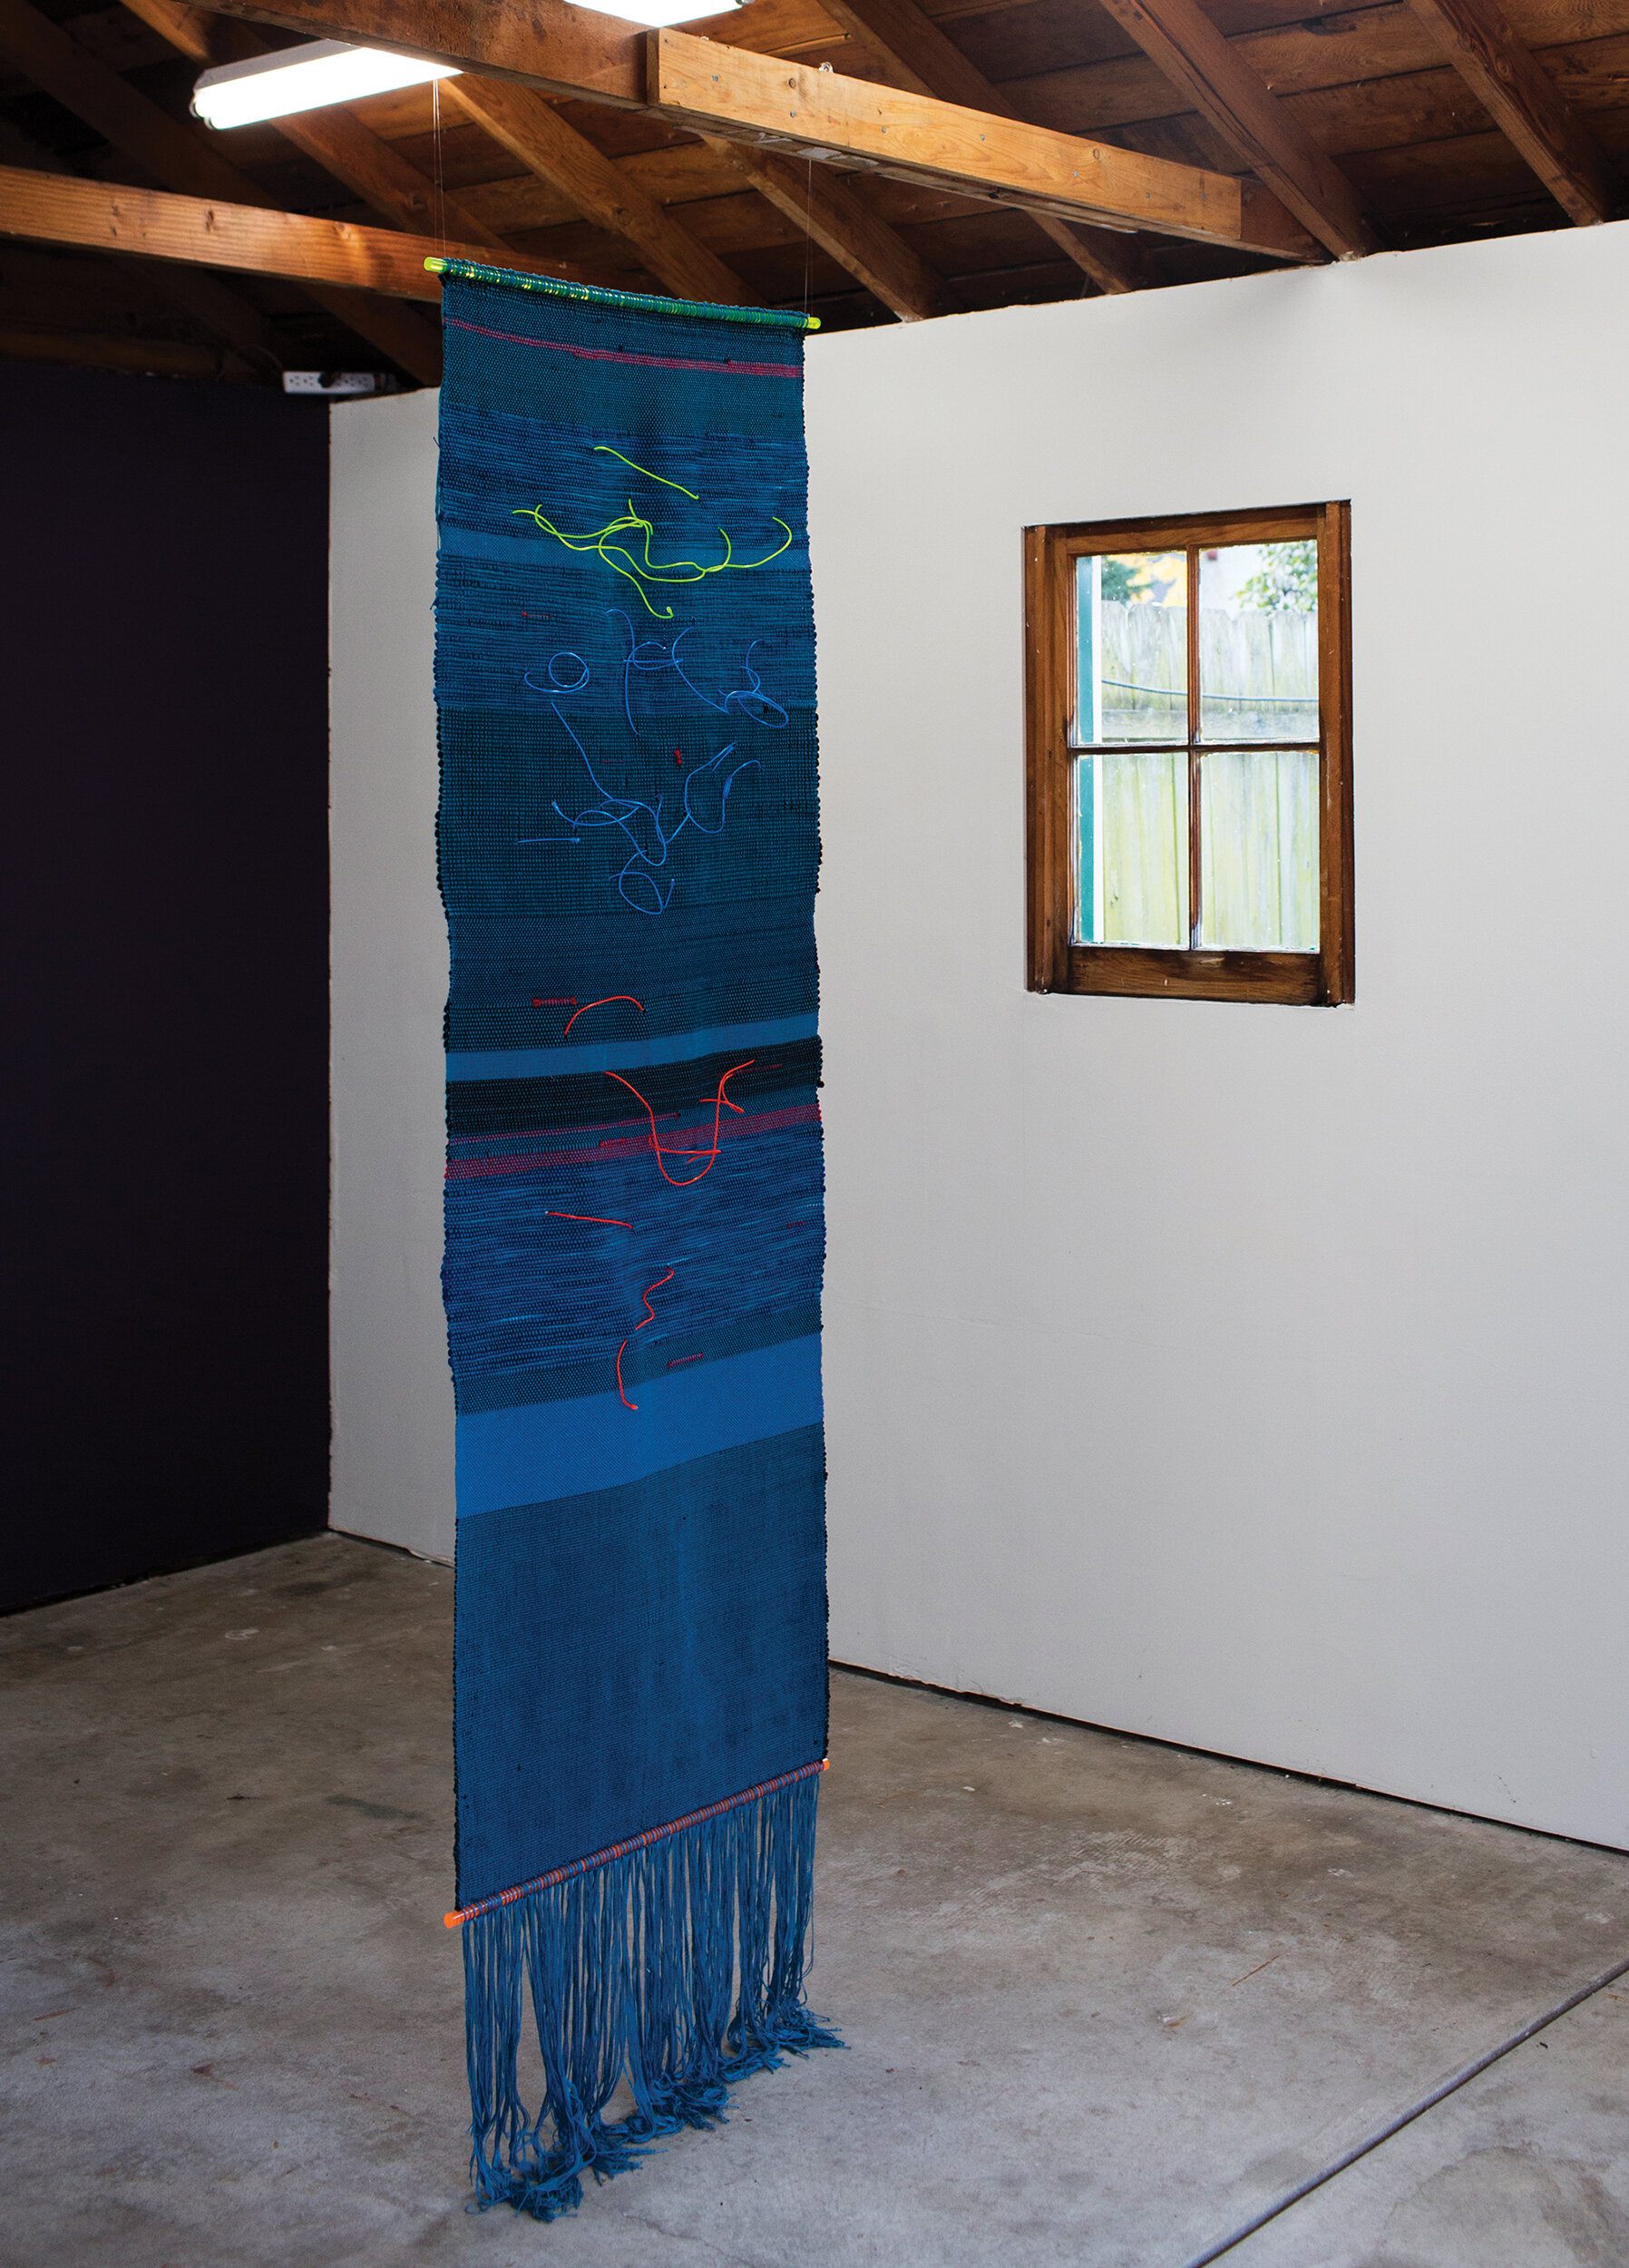 blue nile (for alice), 2017, hand-woven textile: natural and synthetic fibers, electroluminescent wires, acrylic rods, battery packs, 22in x 72in x 2in